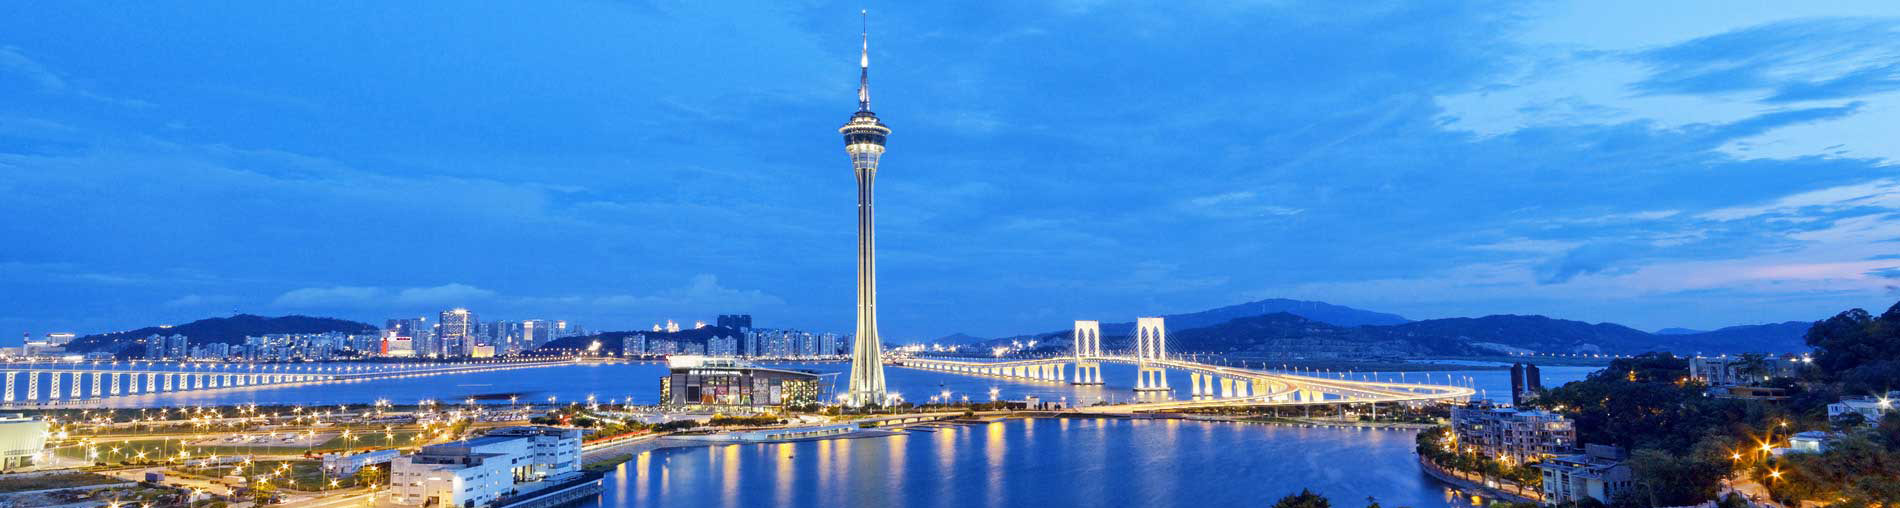 Macau Holiday Tour Packages From India